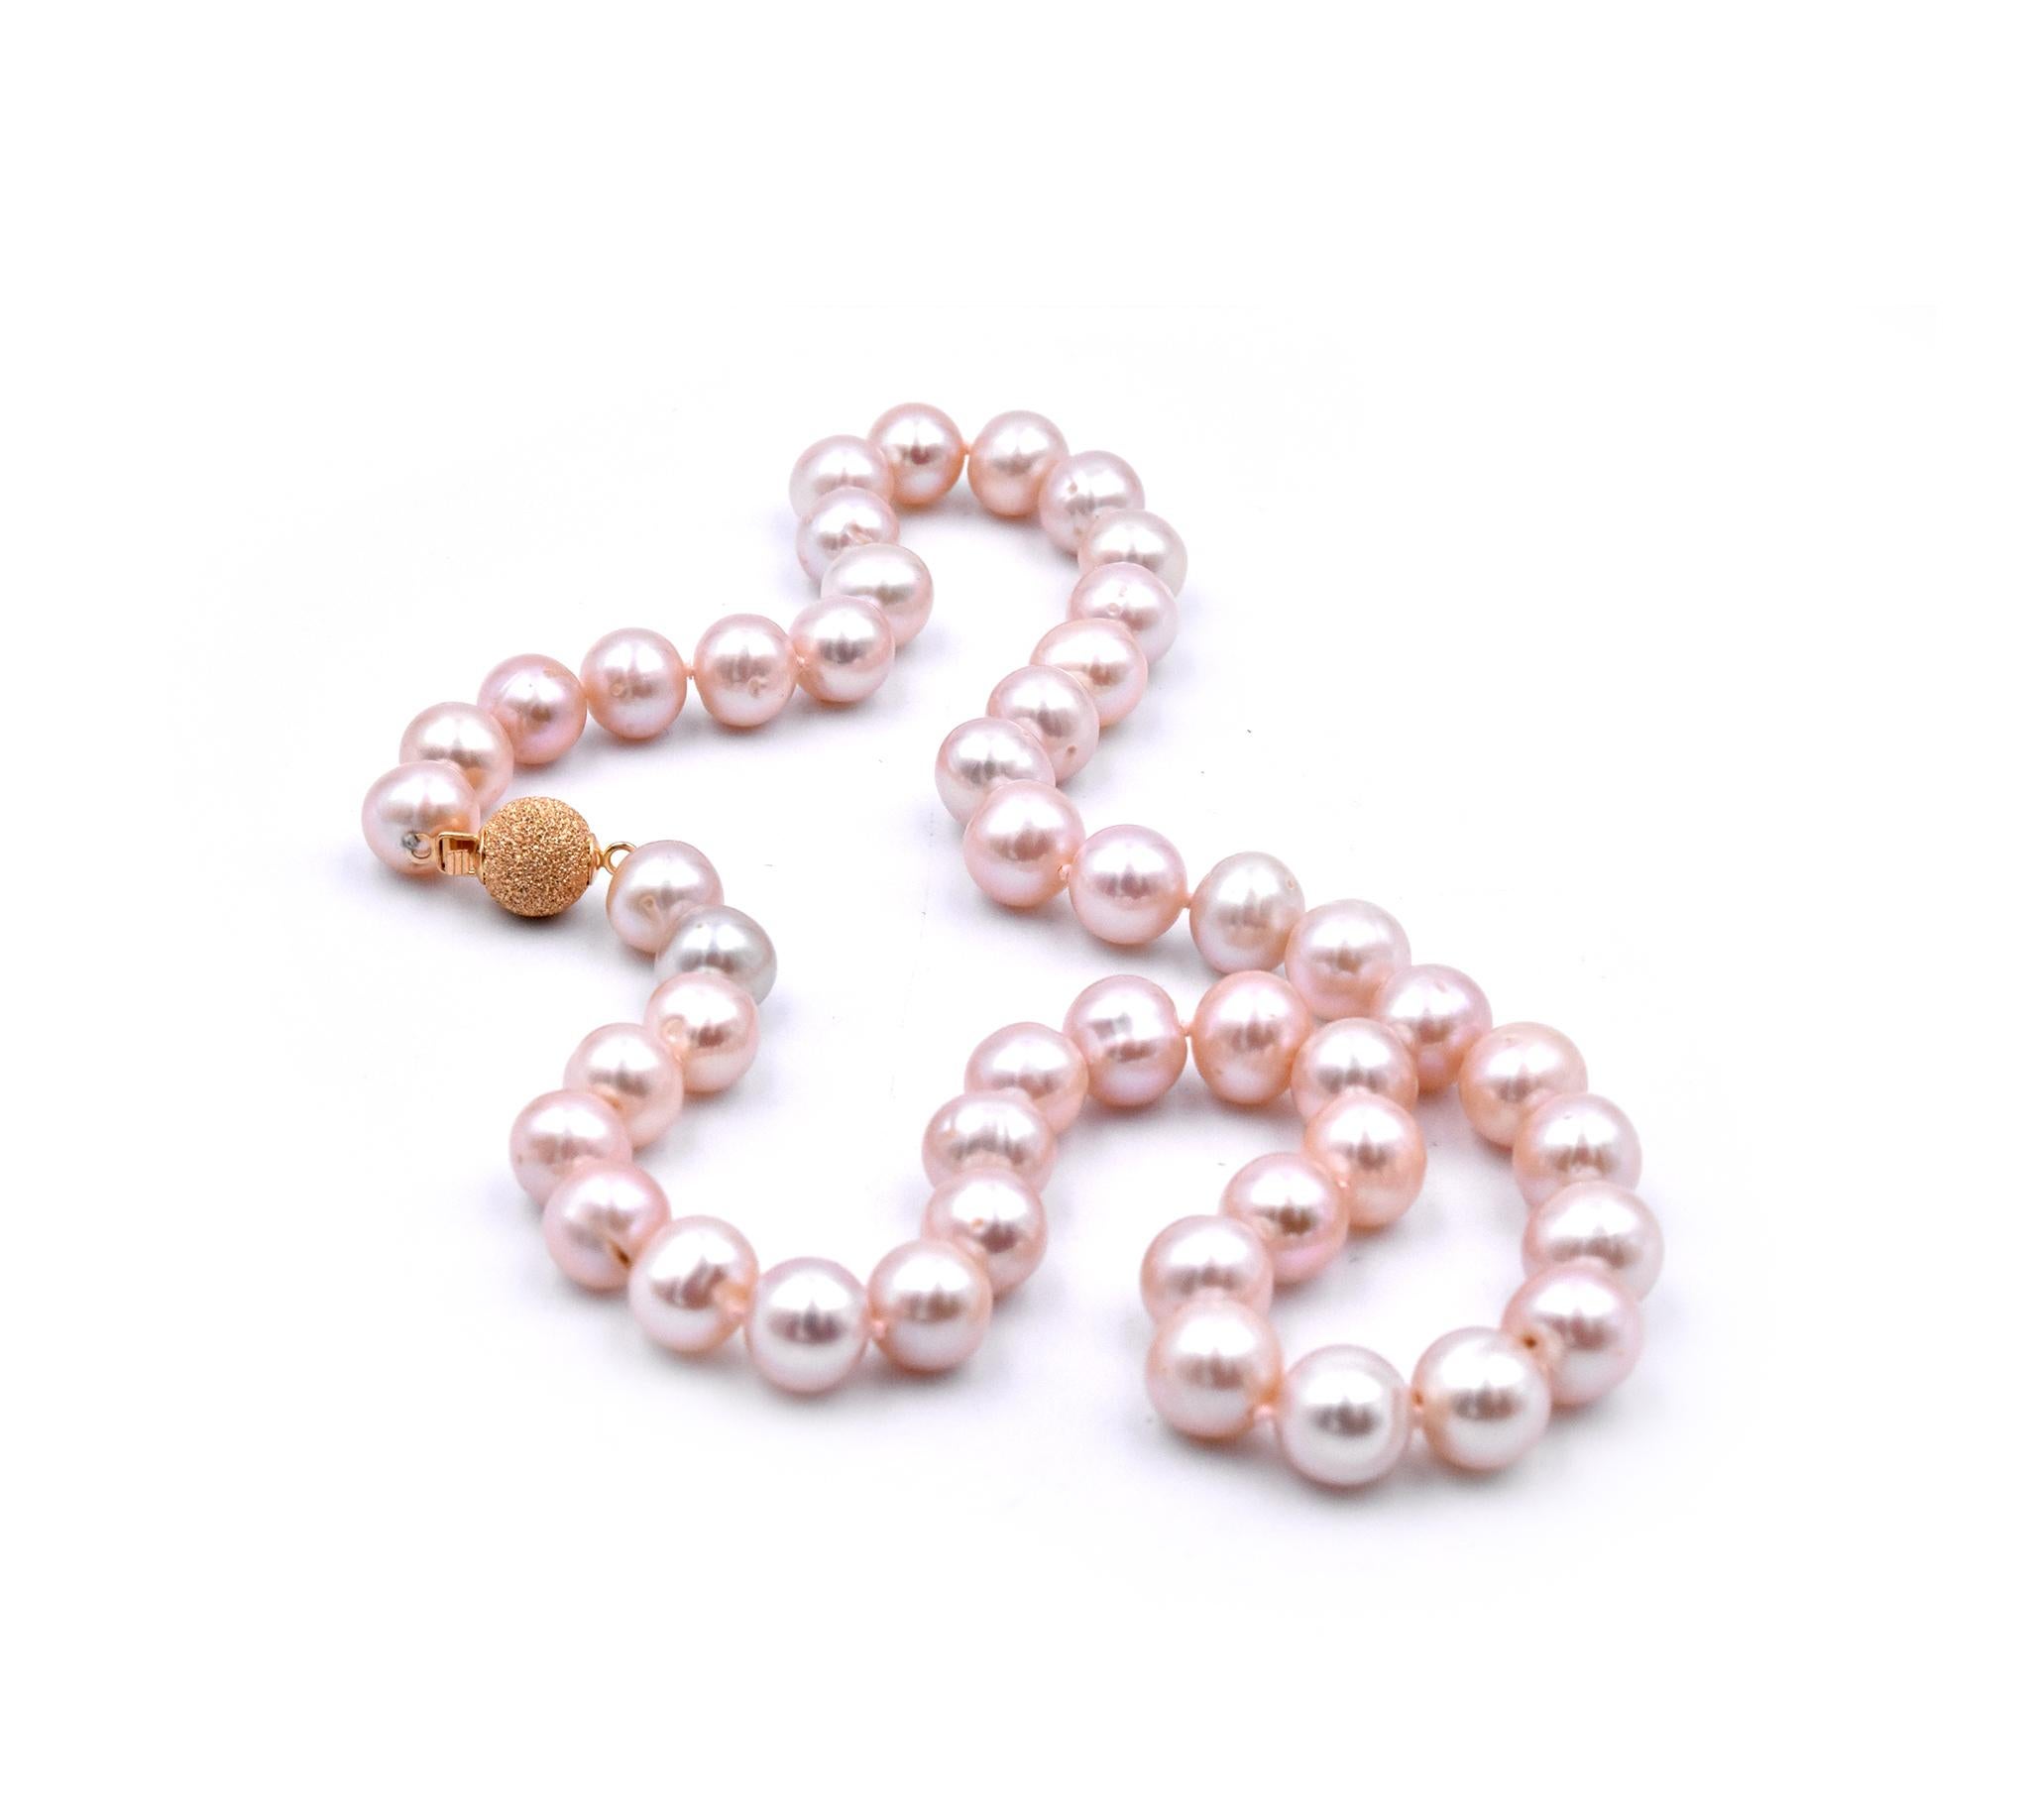 Designer: Custom
Material: 14k yellow gold
Pearls: 8.9mm diameter
Dimensions: necklace measures 18-inches in length
Weight: 50.7 grams
